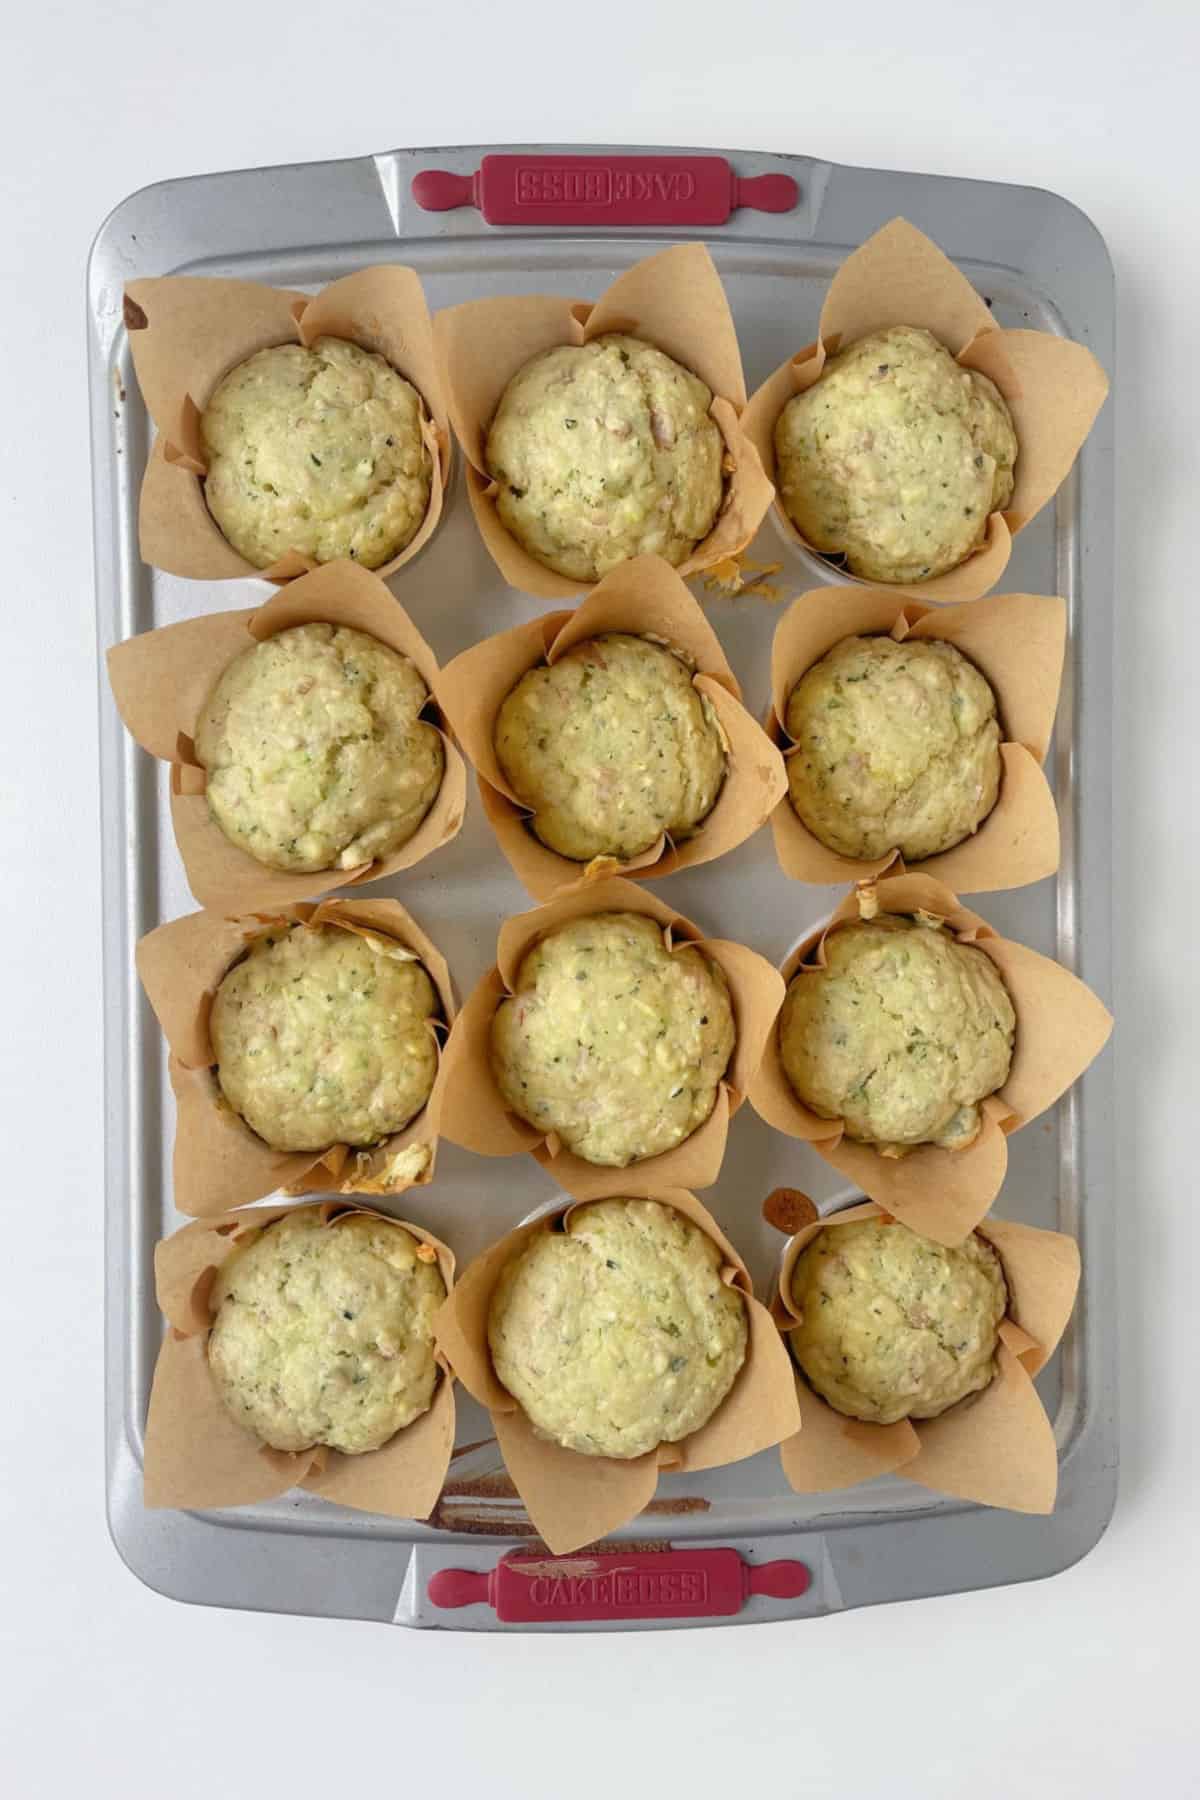 Overhead view of baked savoury muffins straight from the oven in a silver muffin tray.